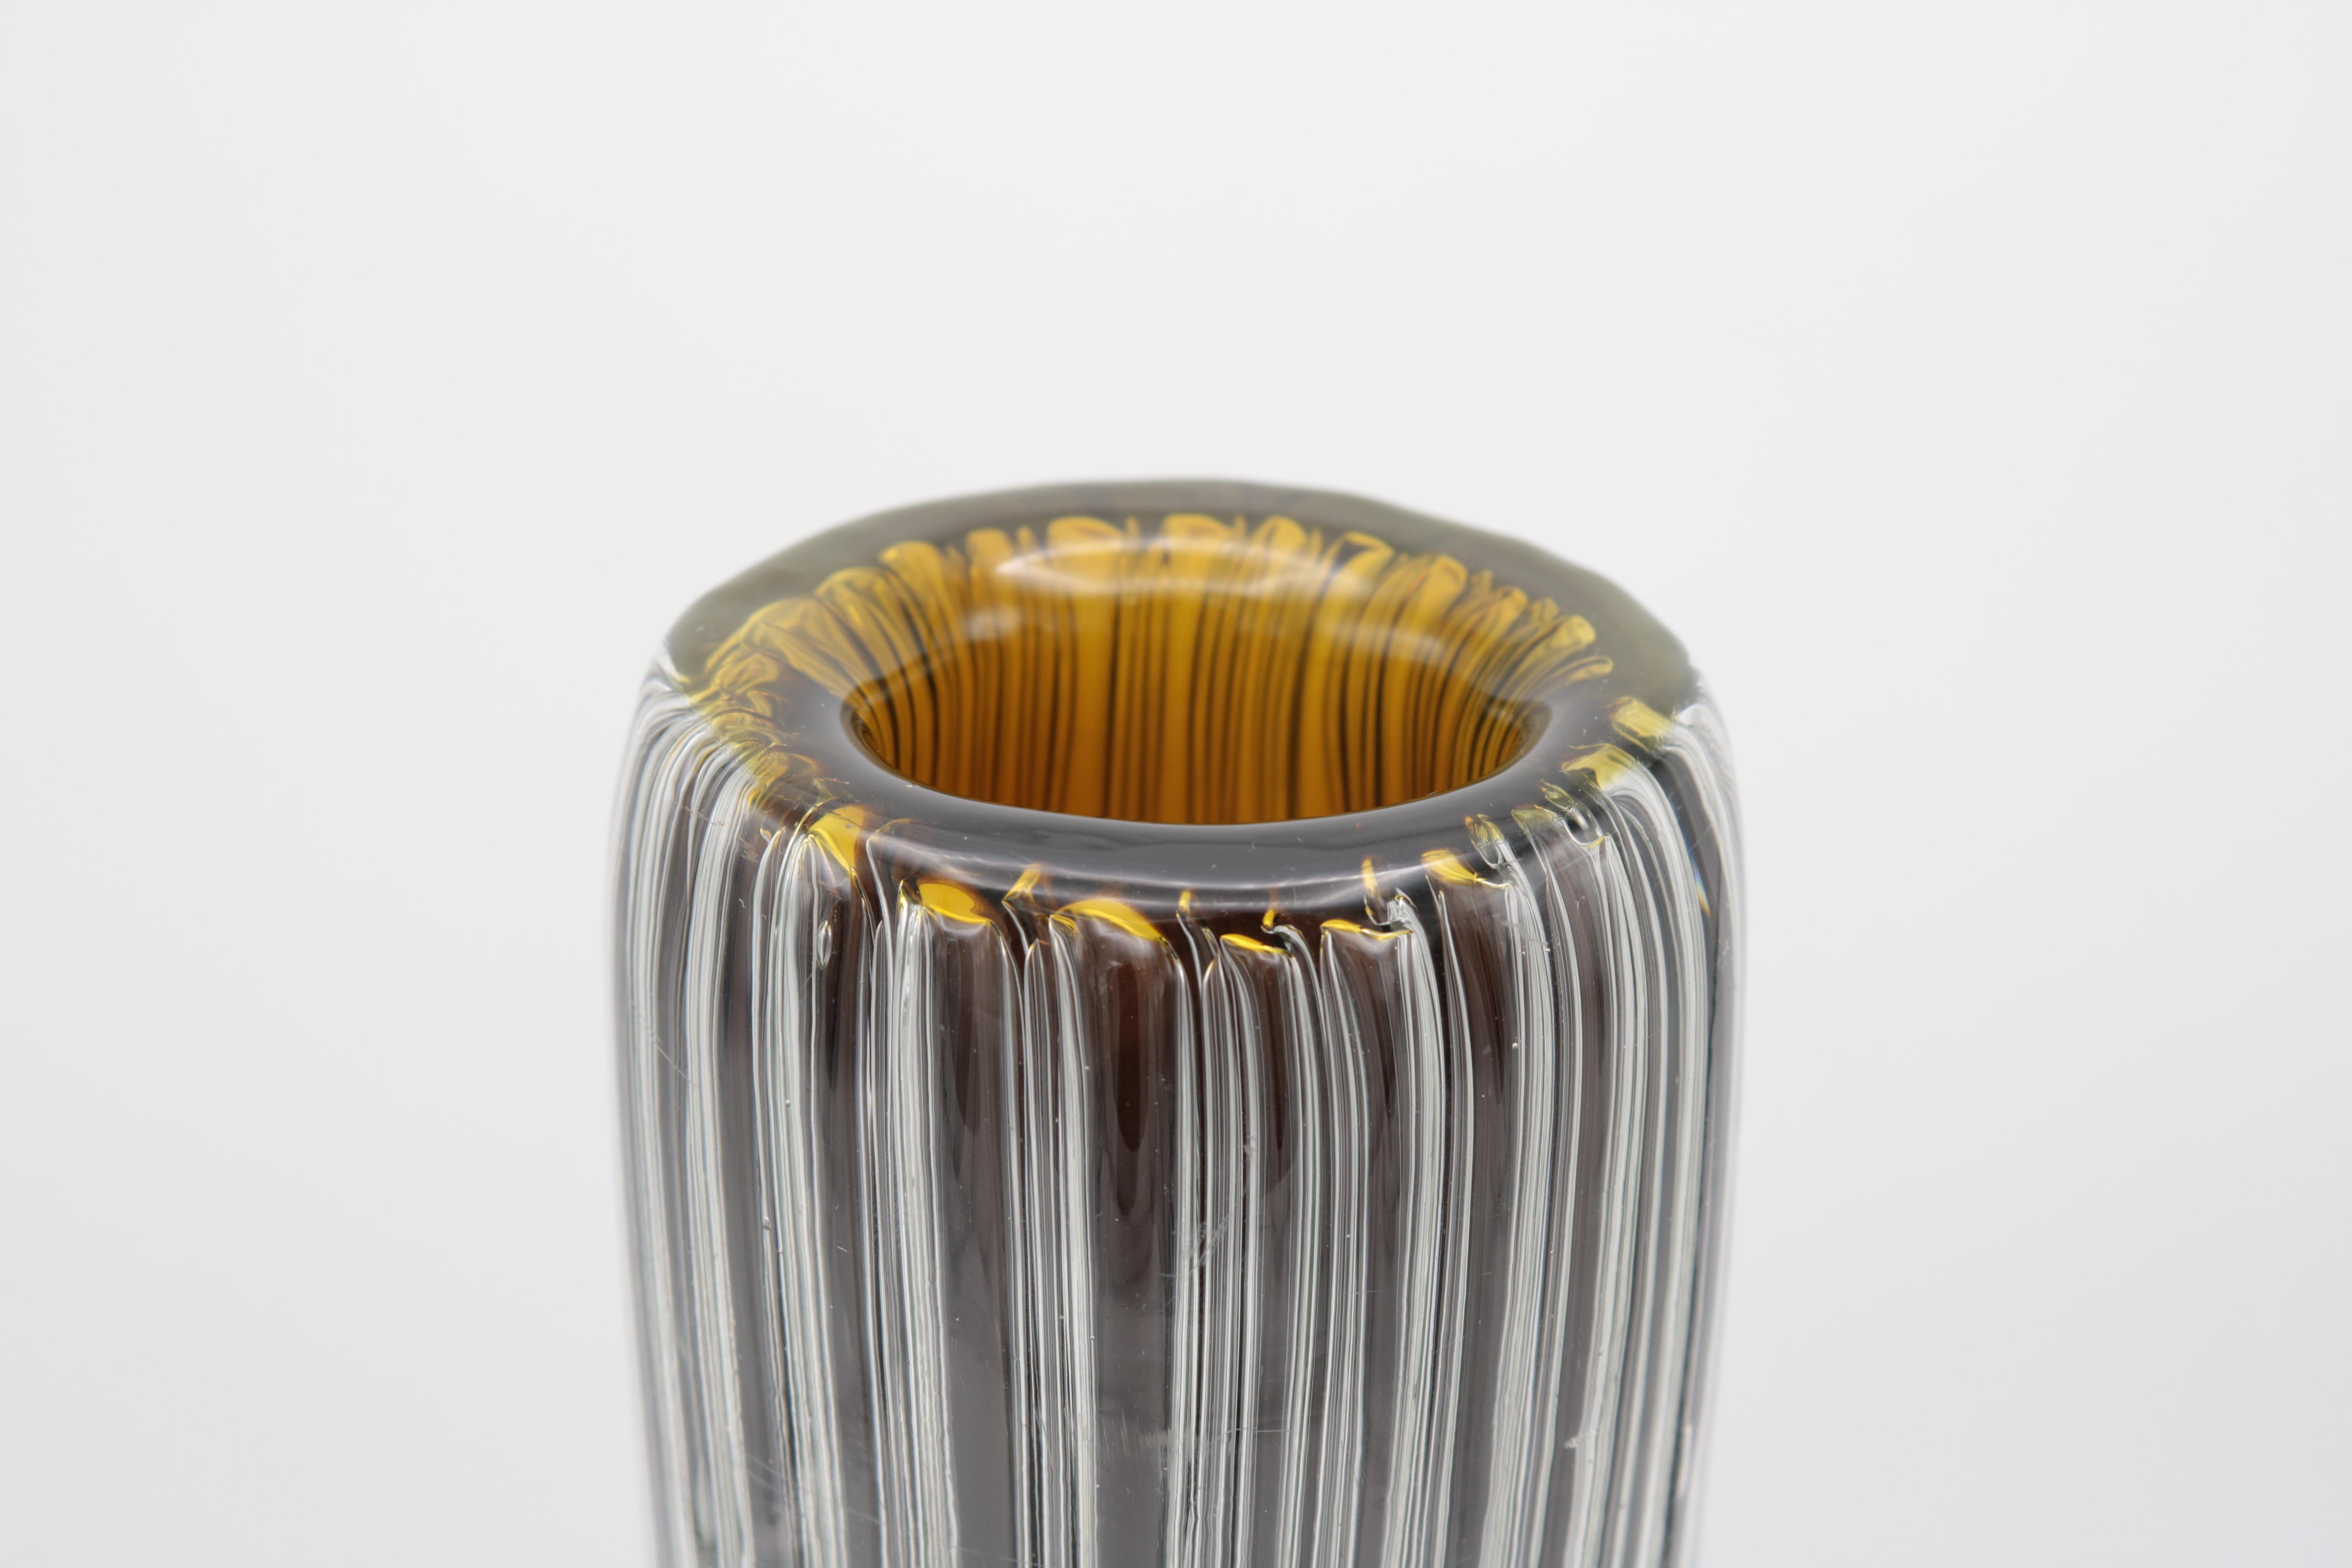 A tall Murano art glass vase by Paolo Venini.
Clear glass with a layer of combed air bubbles
and an inner layer of brown and green.
Engraved: Venini Italia.